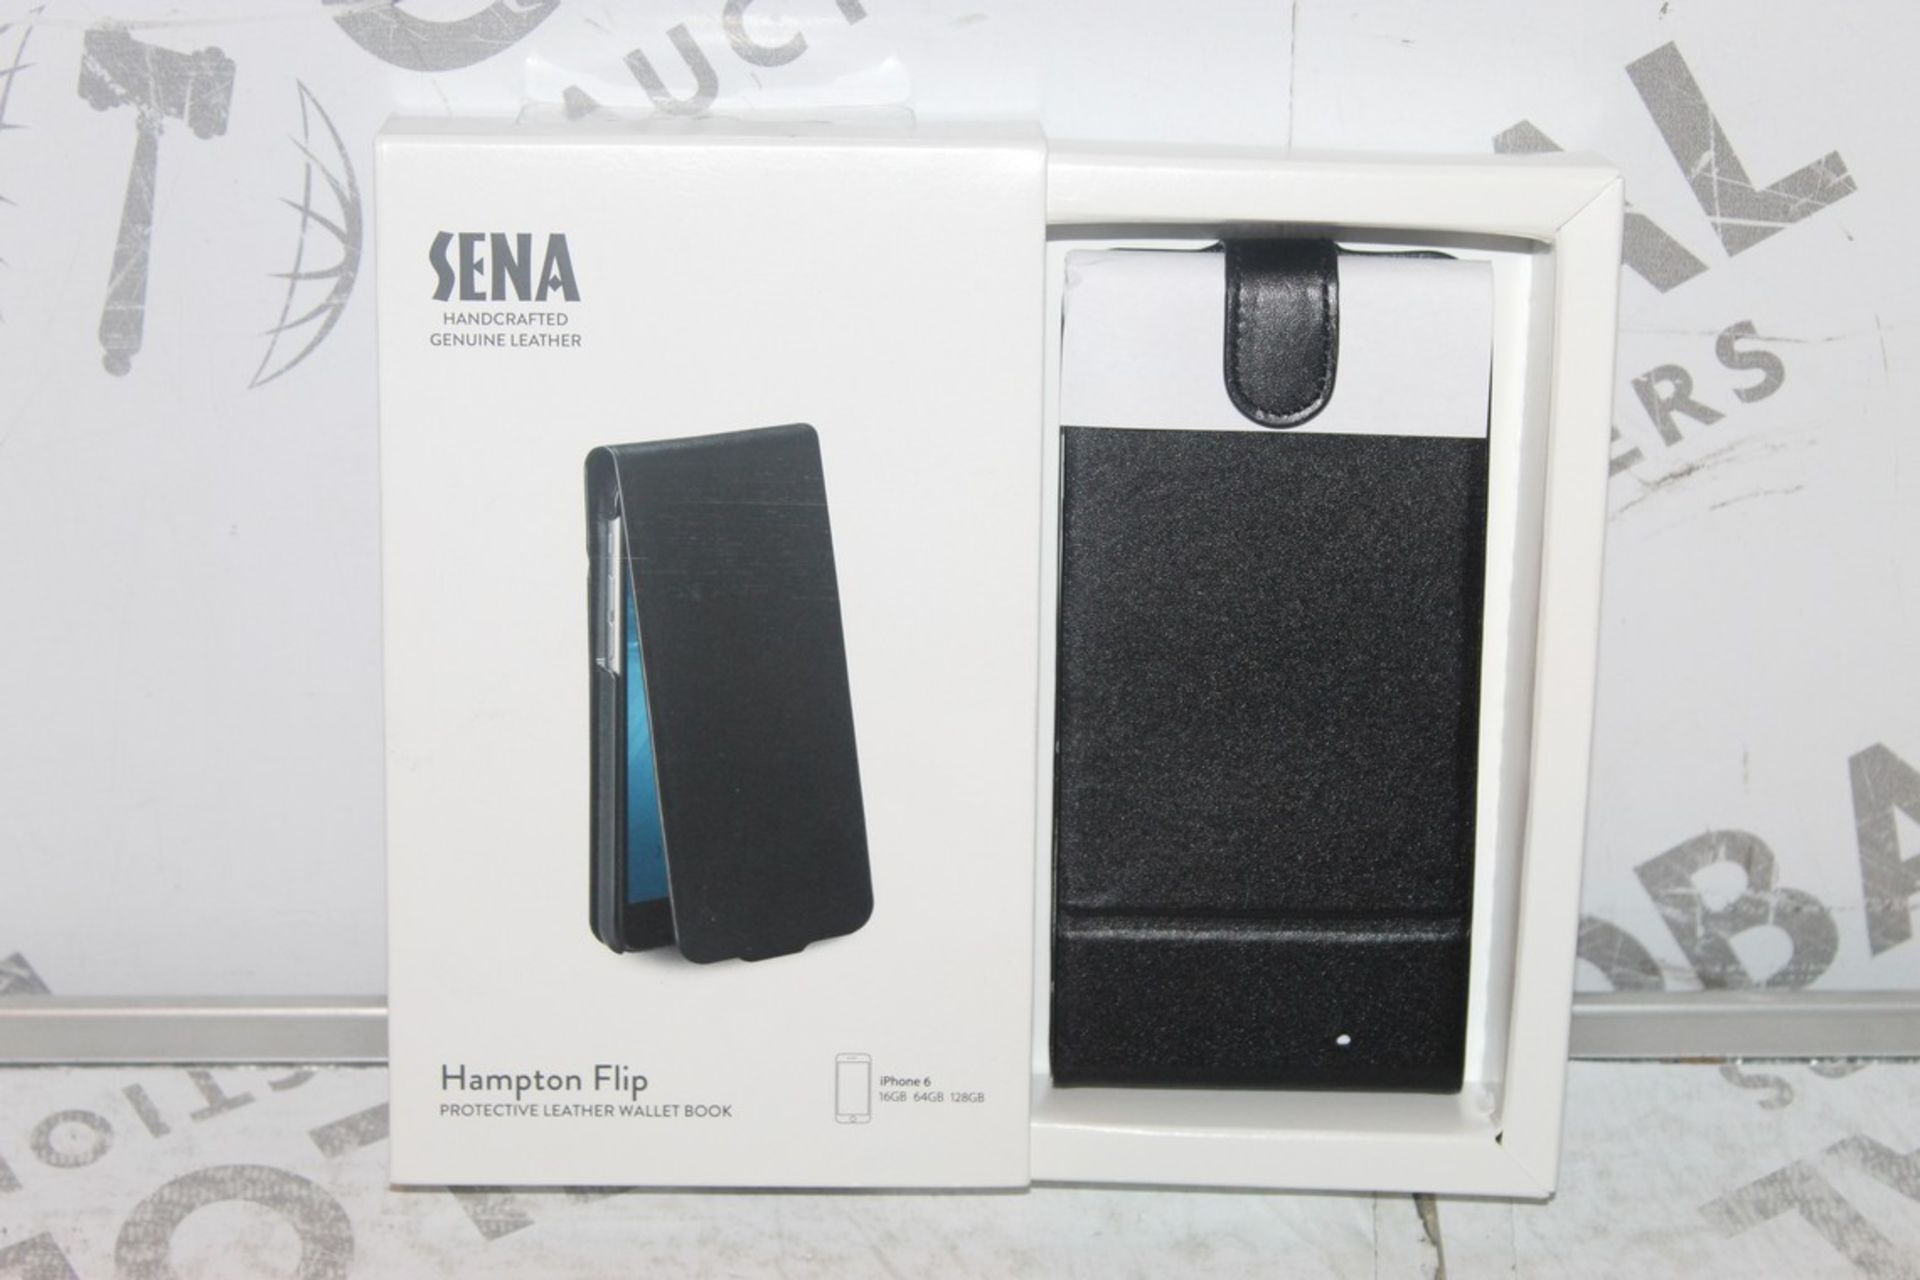 Lot to Contain 10 Sena Hampton Flip iPhone Protective Leather Wallet Book Phone Cases Combined